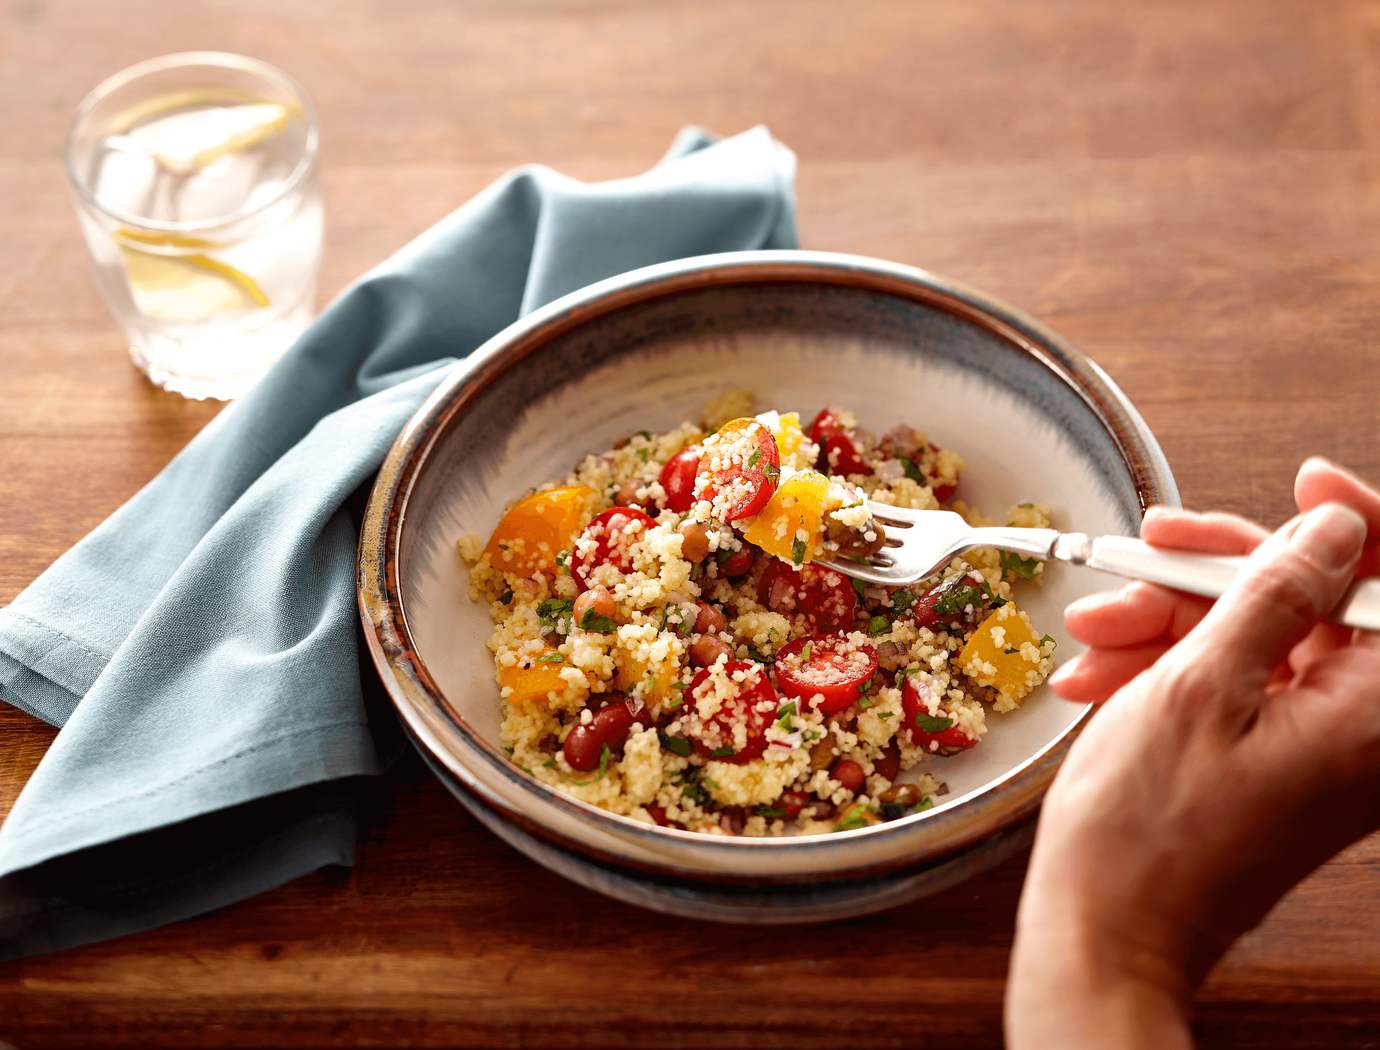 Peach and chickpea couscous salad